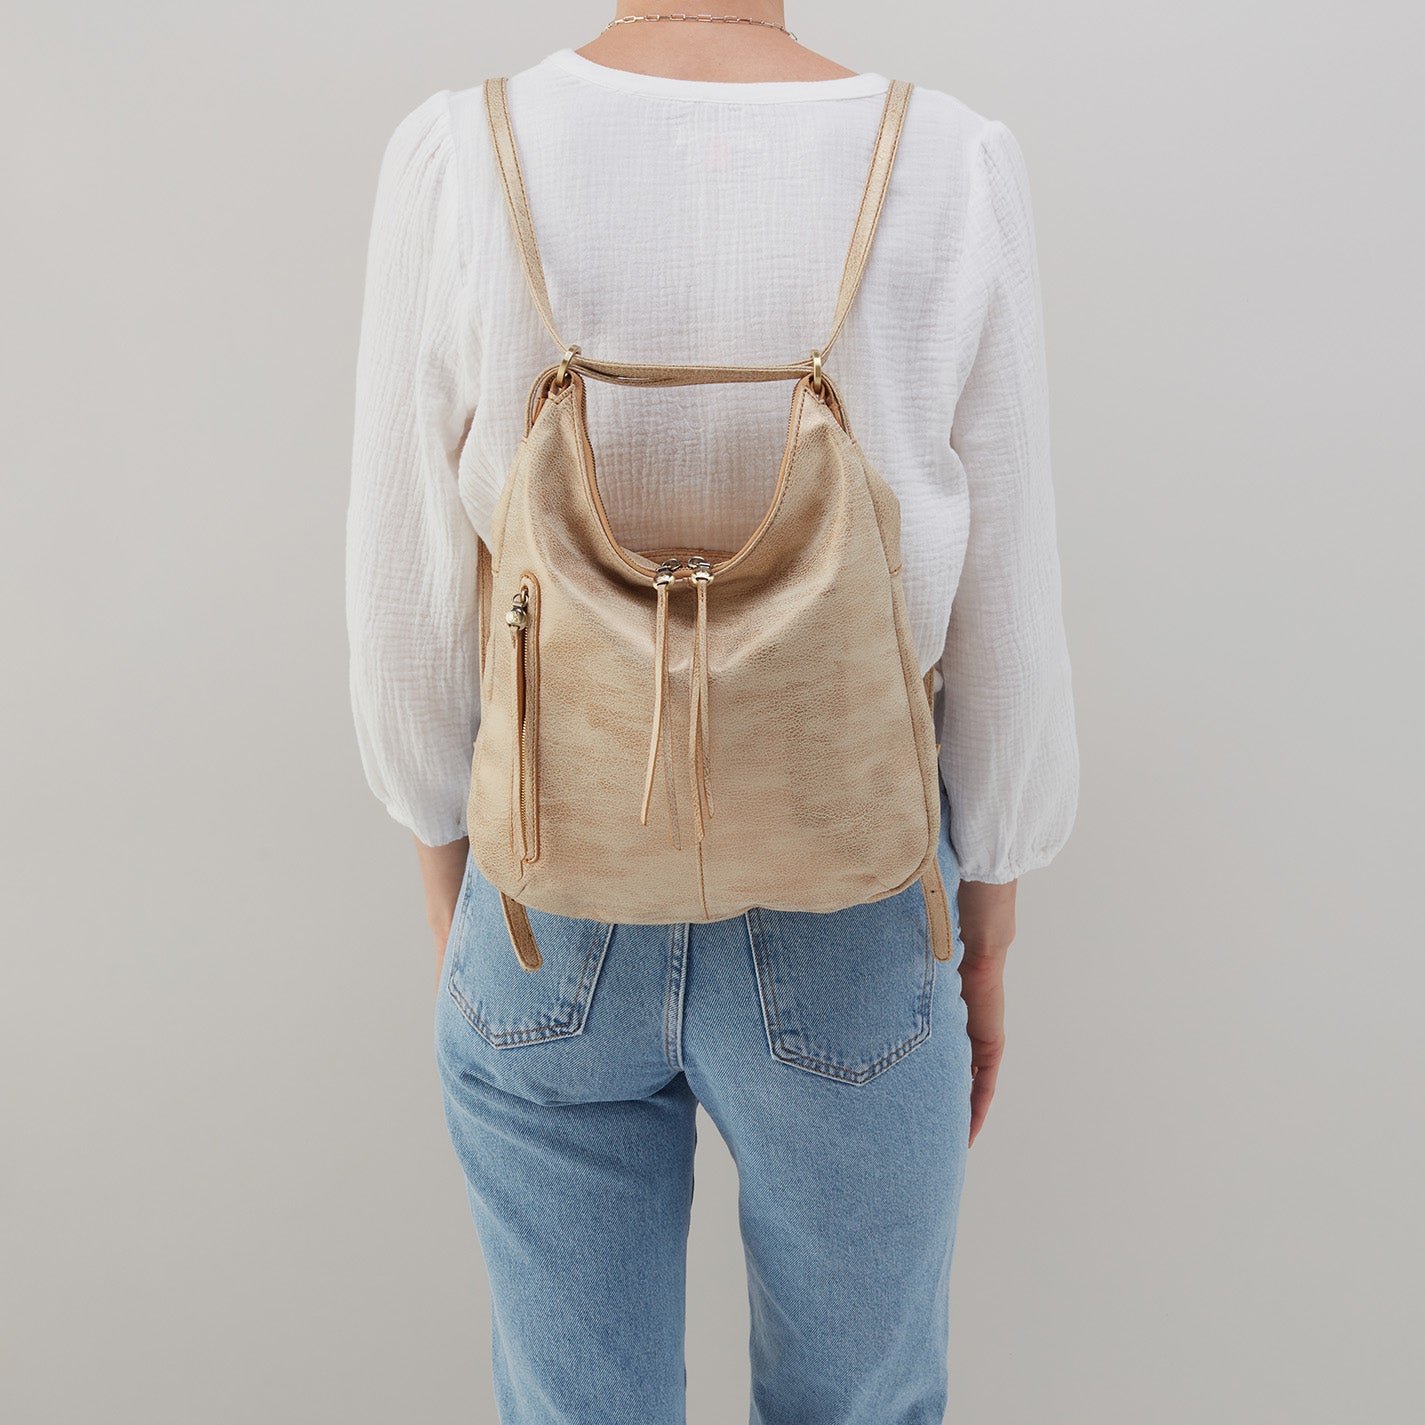 Buckle Backpack Purse - Lusher Archives – LUSHER.co